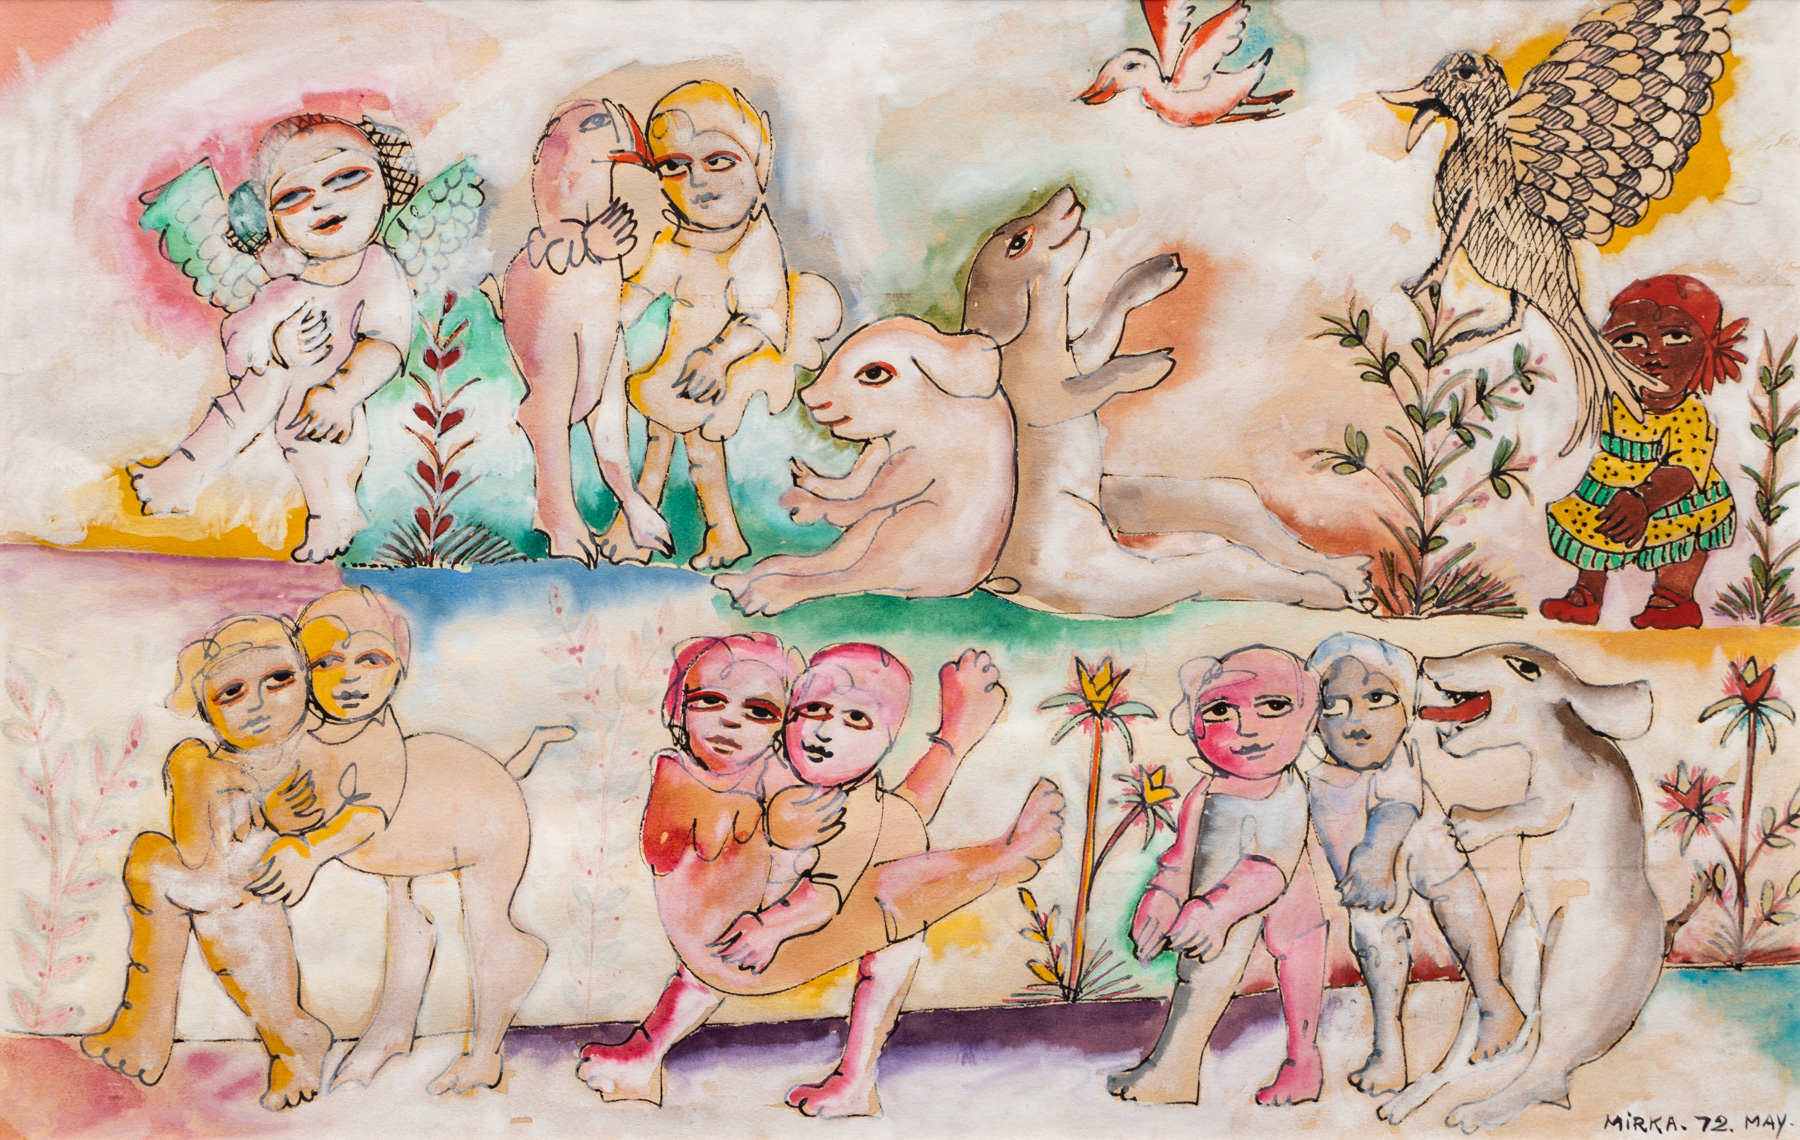 Ink and gouache painting of people and animals in various pastel hues.